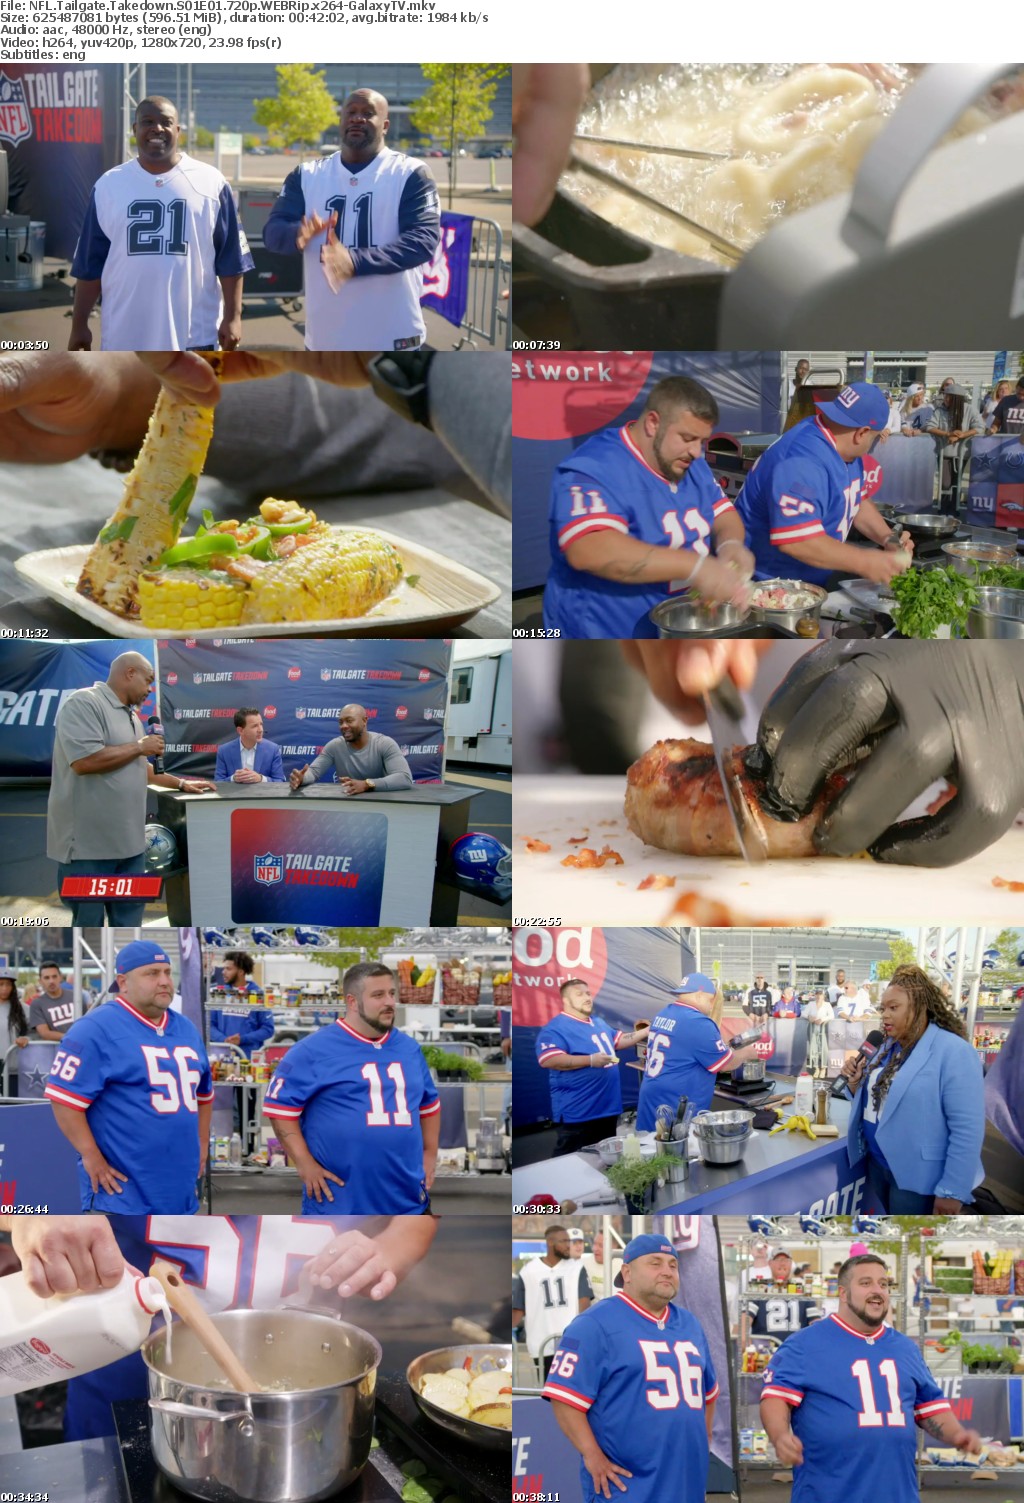 NFL Tailgate Takedown S01 COMPLETE 720p WEBRip x264-GalaxyTV